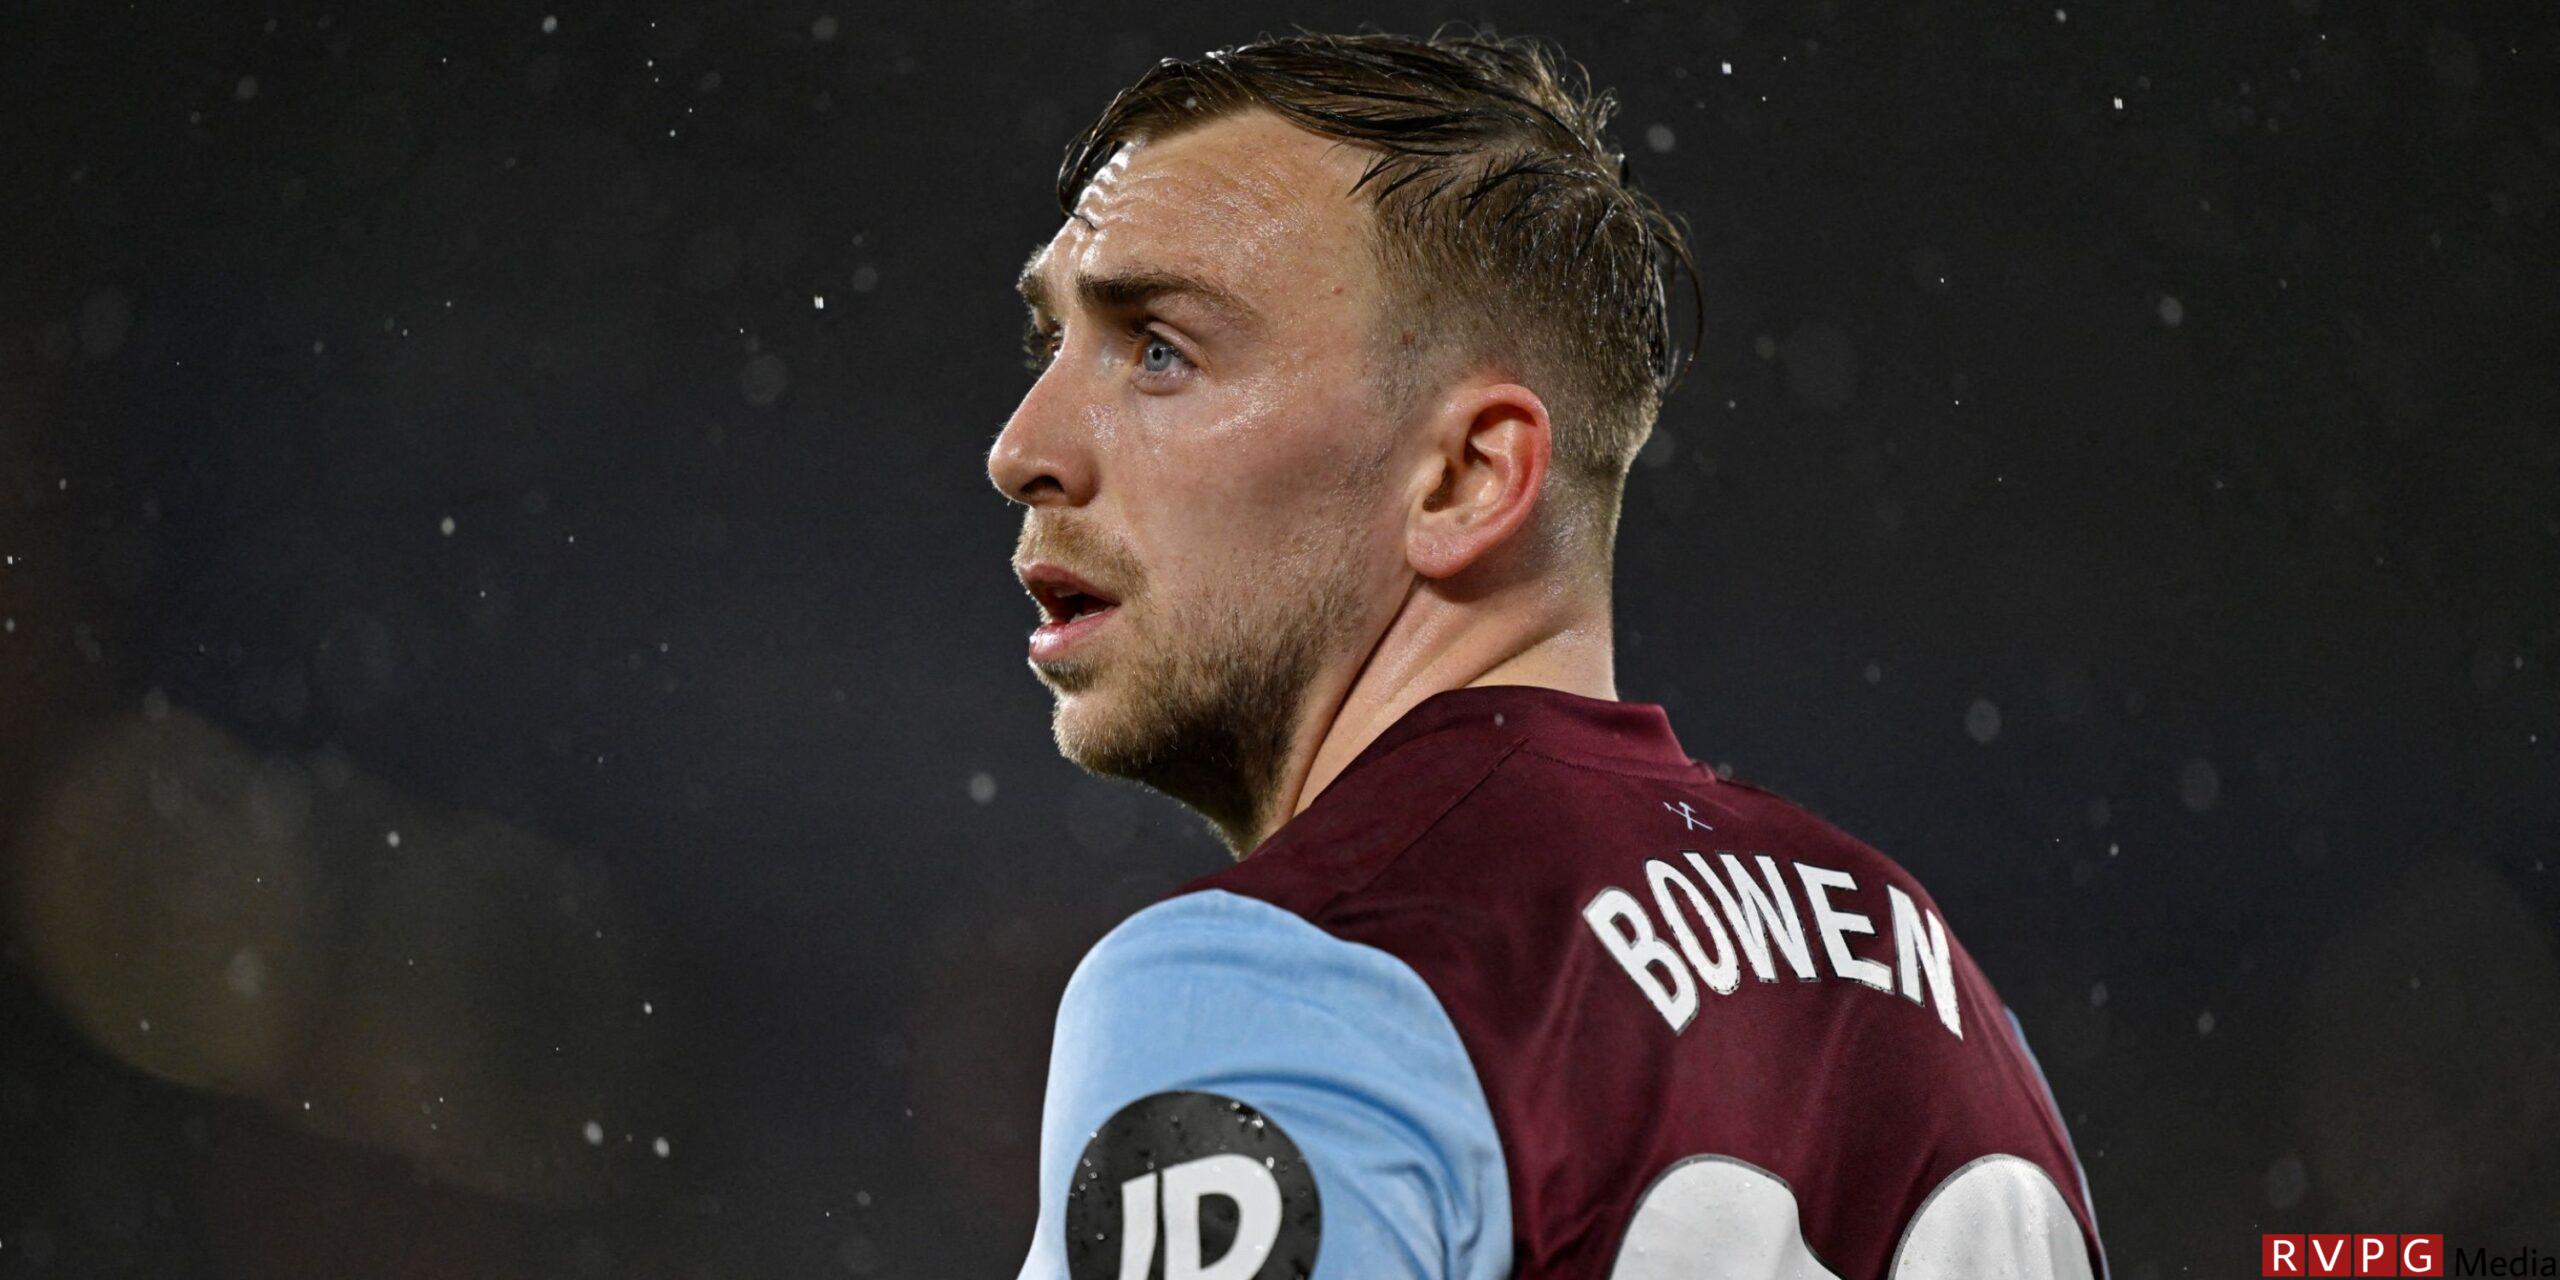 Saved by Bowen: 5/10 West Ham man should never wear the shirt again